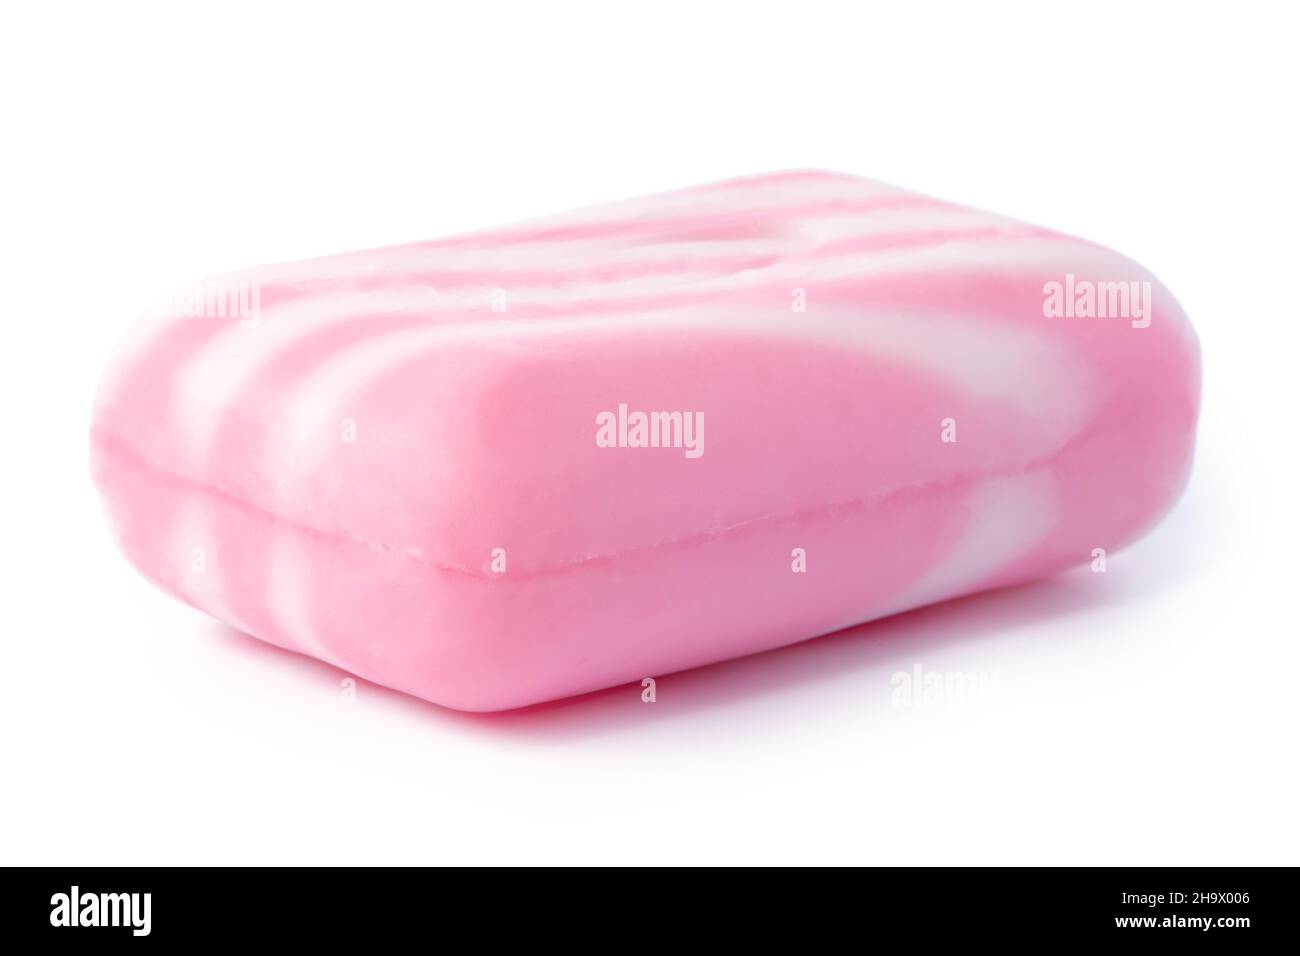 A heart shaped bar of soap completely surrounded by 5.56